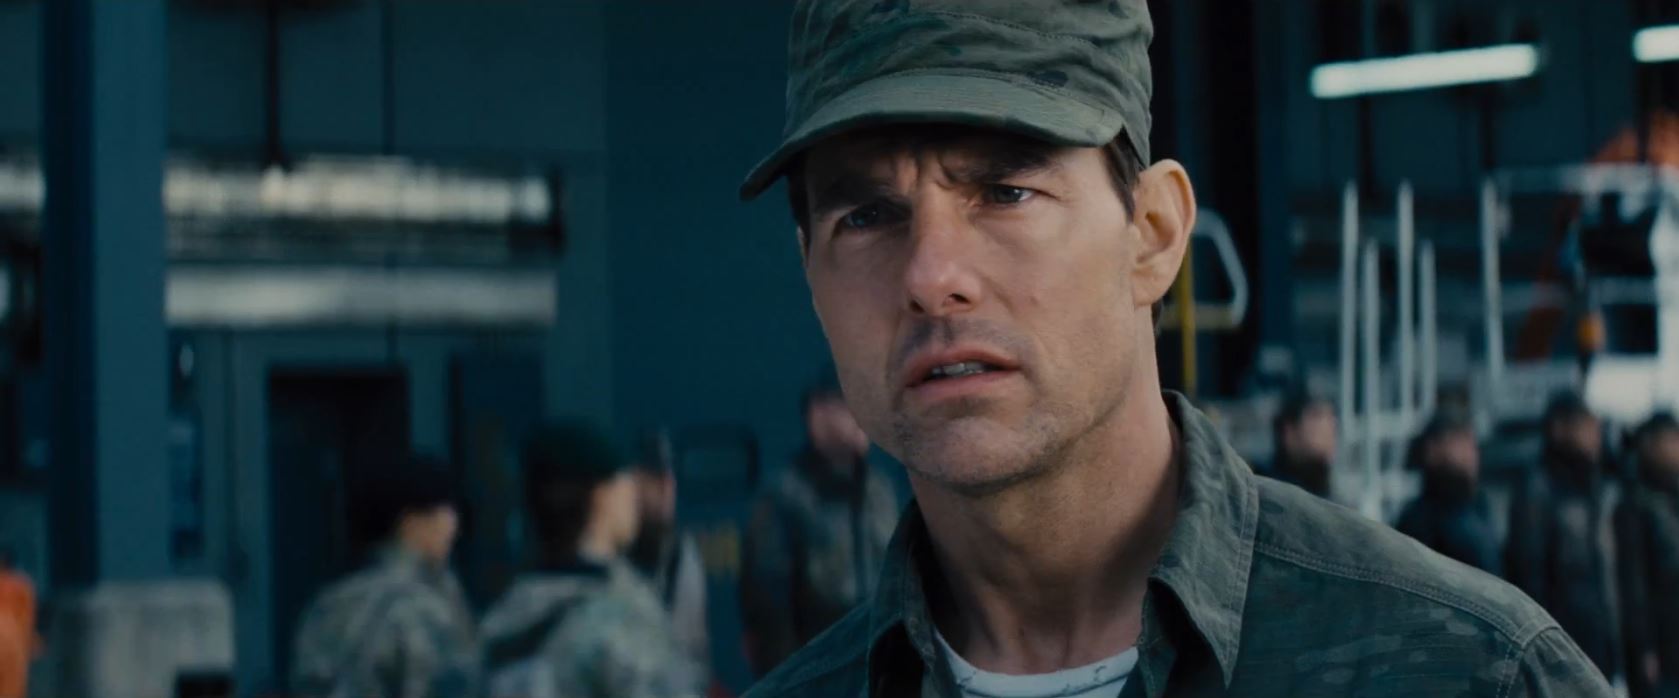 Tom Cruise as Lt. Col. Cage - Edge of Tomorrow